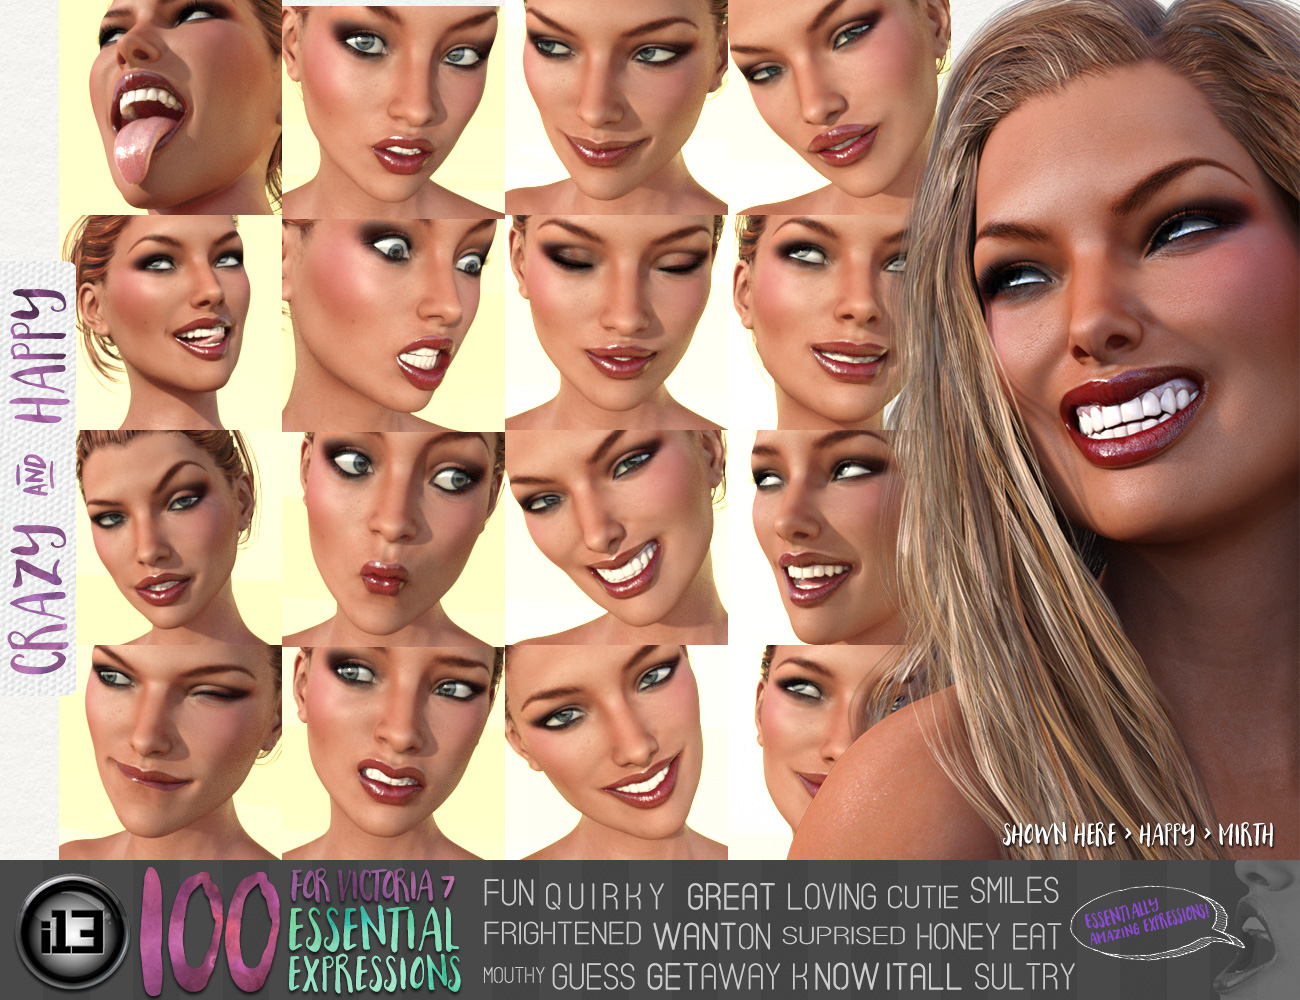 i13 100 Essential Expressions for Victoria 7 by: ironman13, 3D Models by Daz 3D